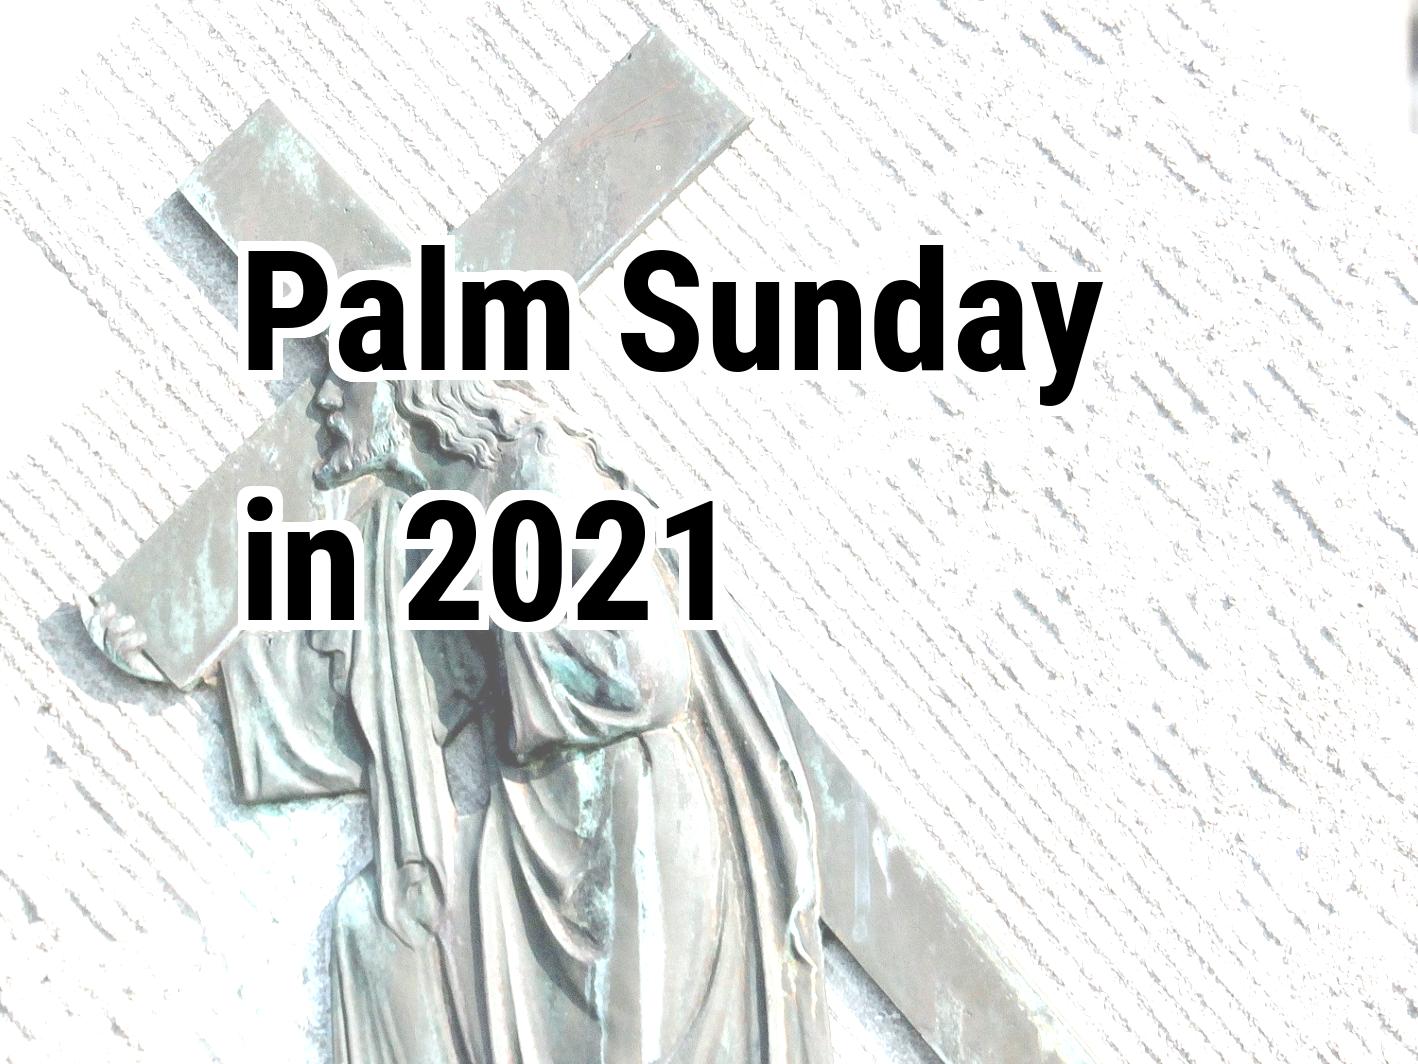 Palm Sunday 2021. When is Palm Sunday in 2021? United